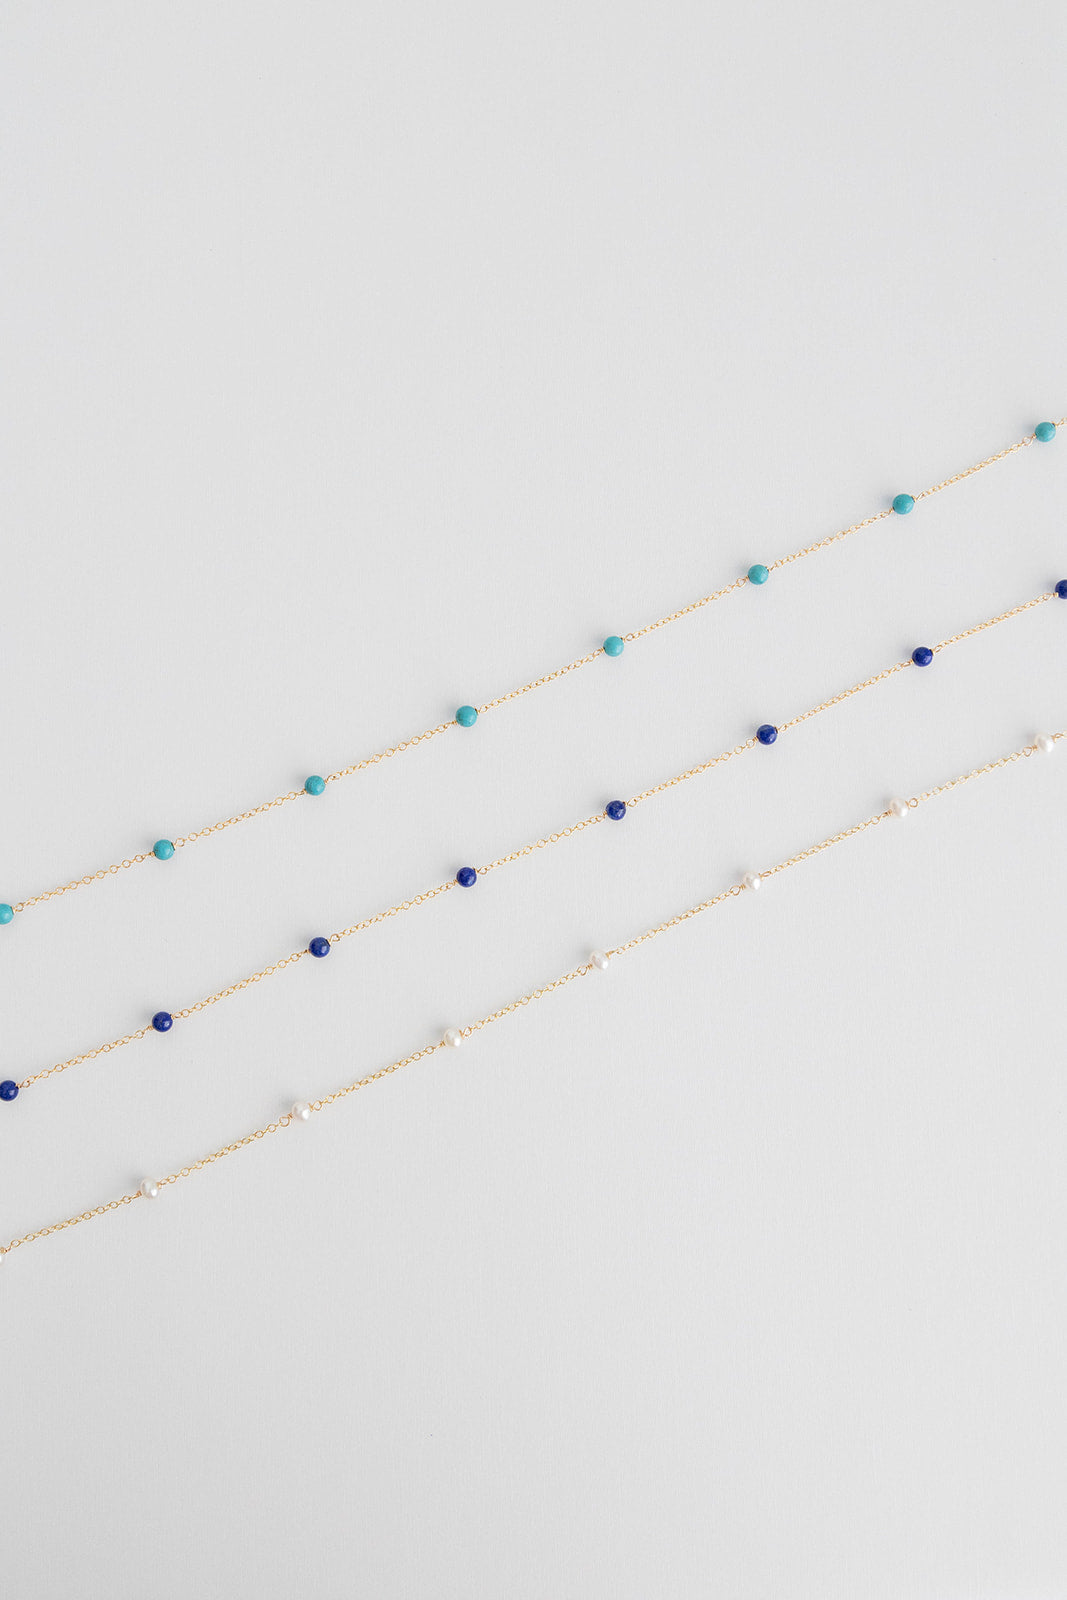 Three necklaces lay on a white background with small freshwater pearls on a 14k gold cable link chain.